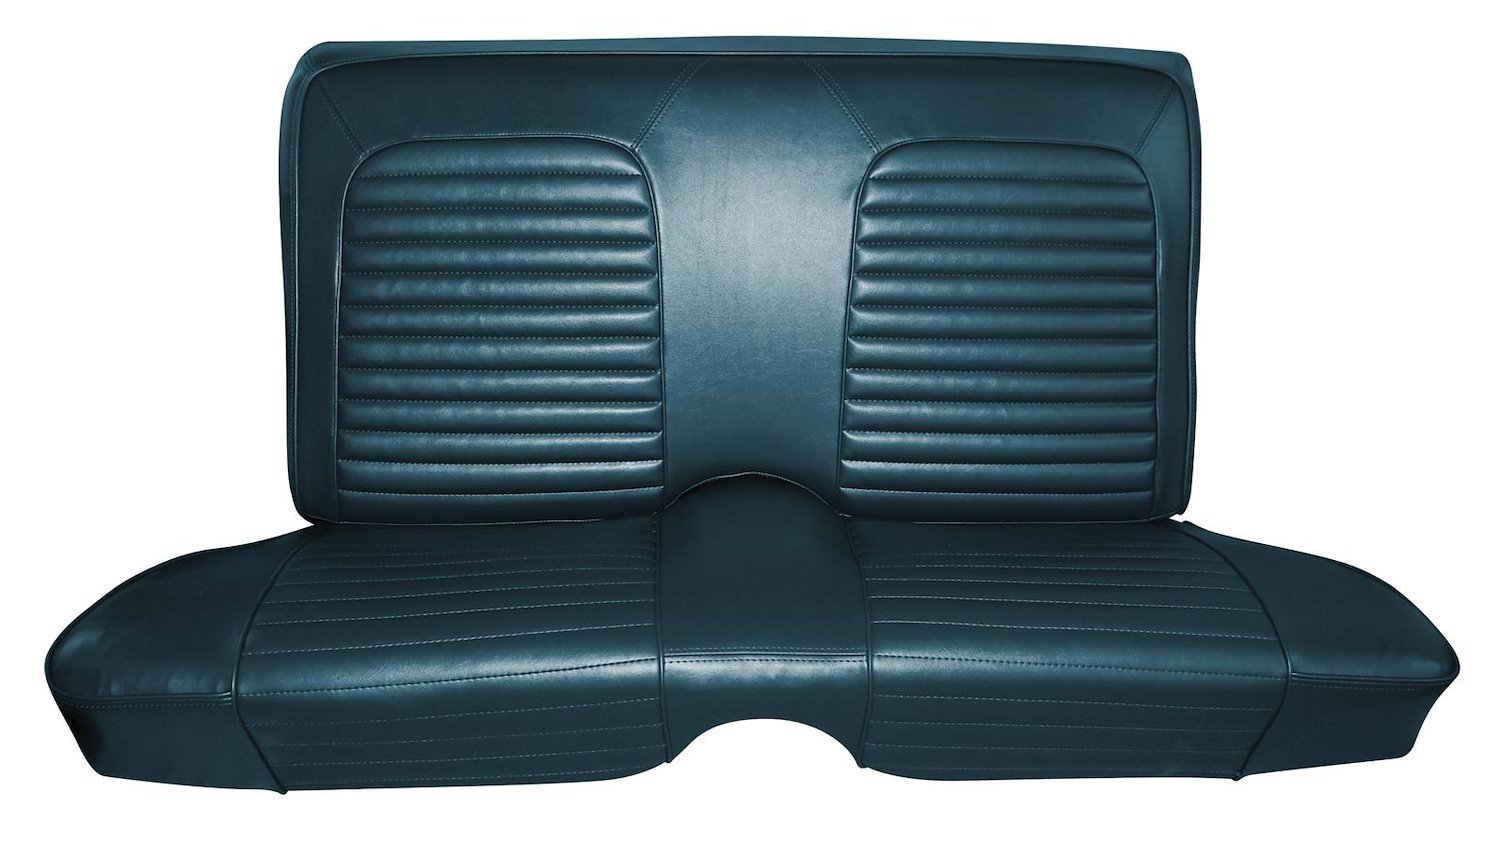 1971-1973 Ford Mustang Mach-1 Convertible Interior Rear Bench Seat Upholstery Set